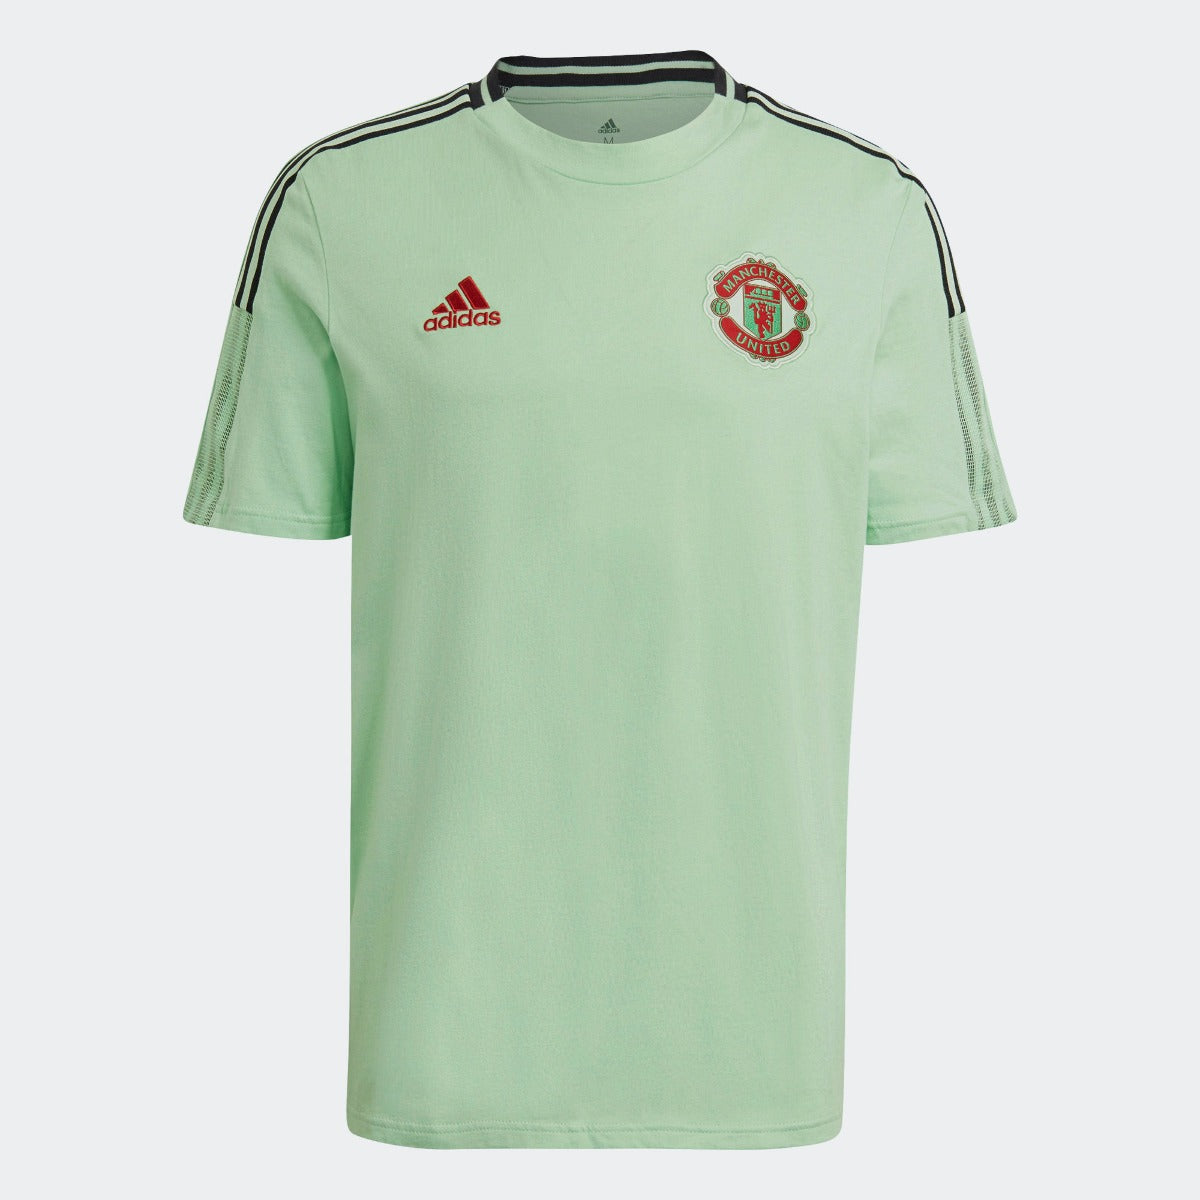 Adidas 2021 Manchester United Tee Shirt - Glory Mint (Front)